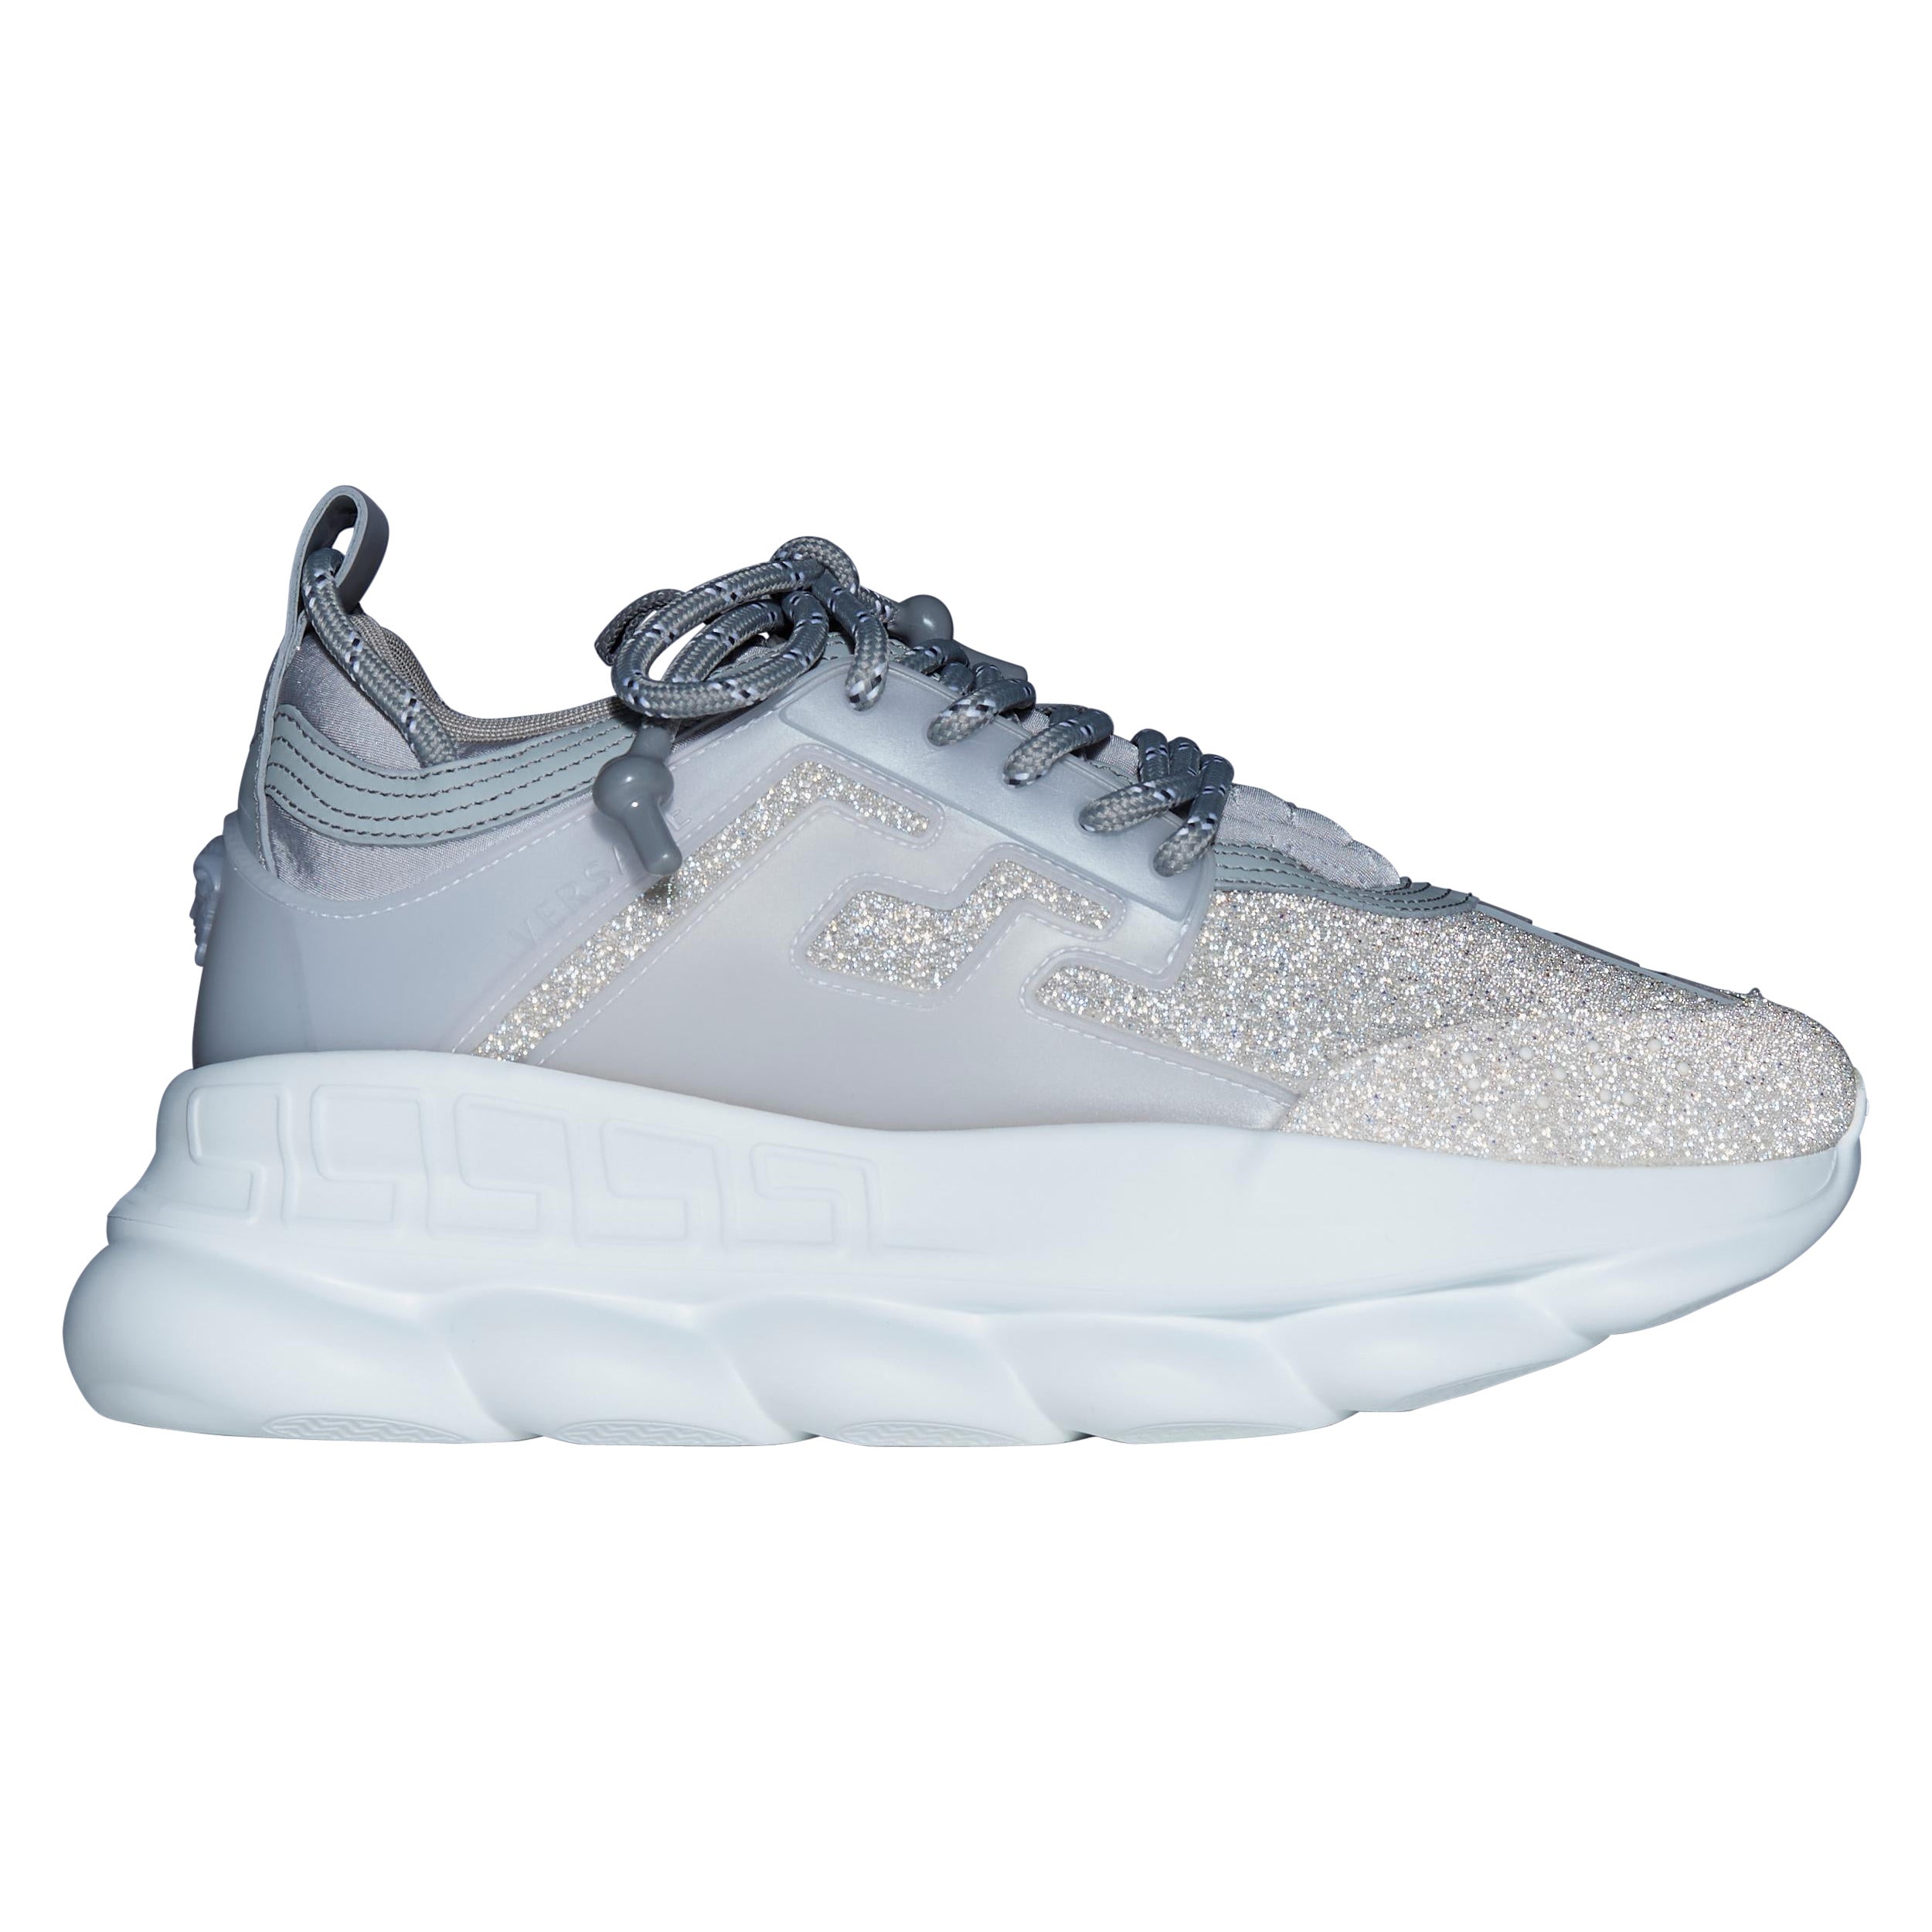 new VERSACE Chain Reaction Reflective Silver Crystal Rhinestone sneaker EU41 US8 For Sale